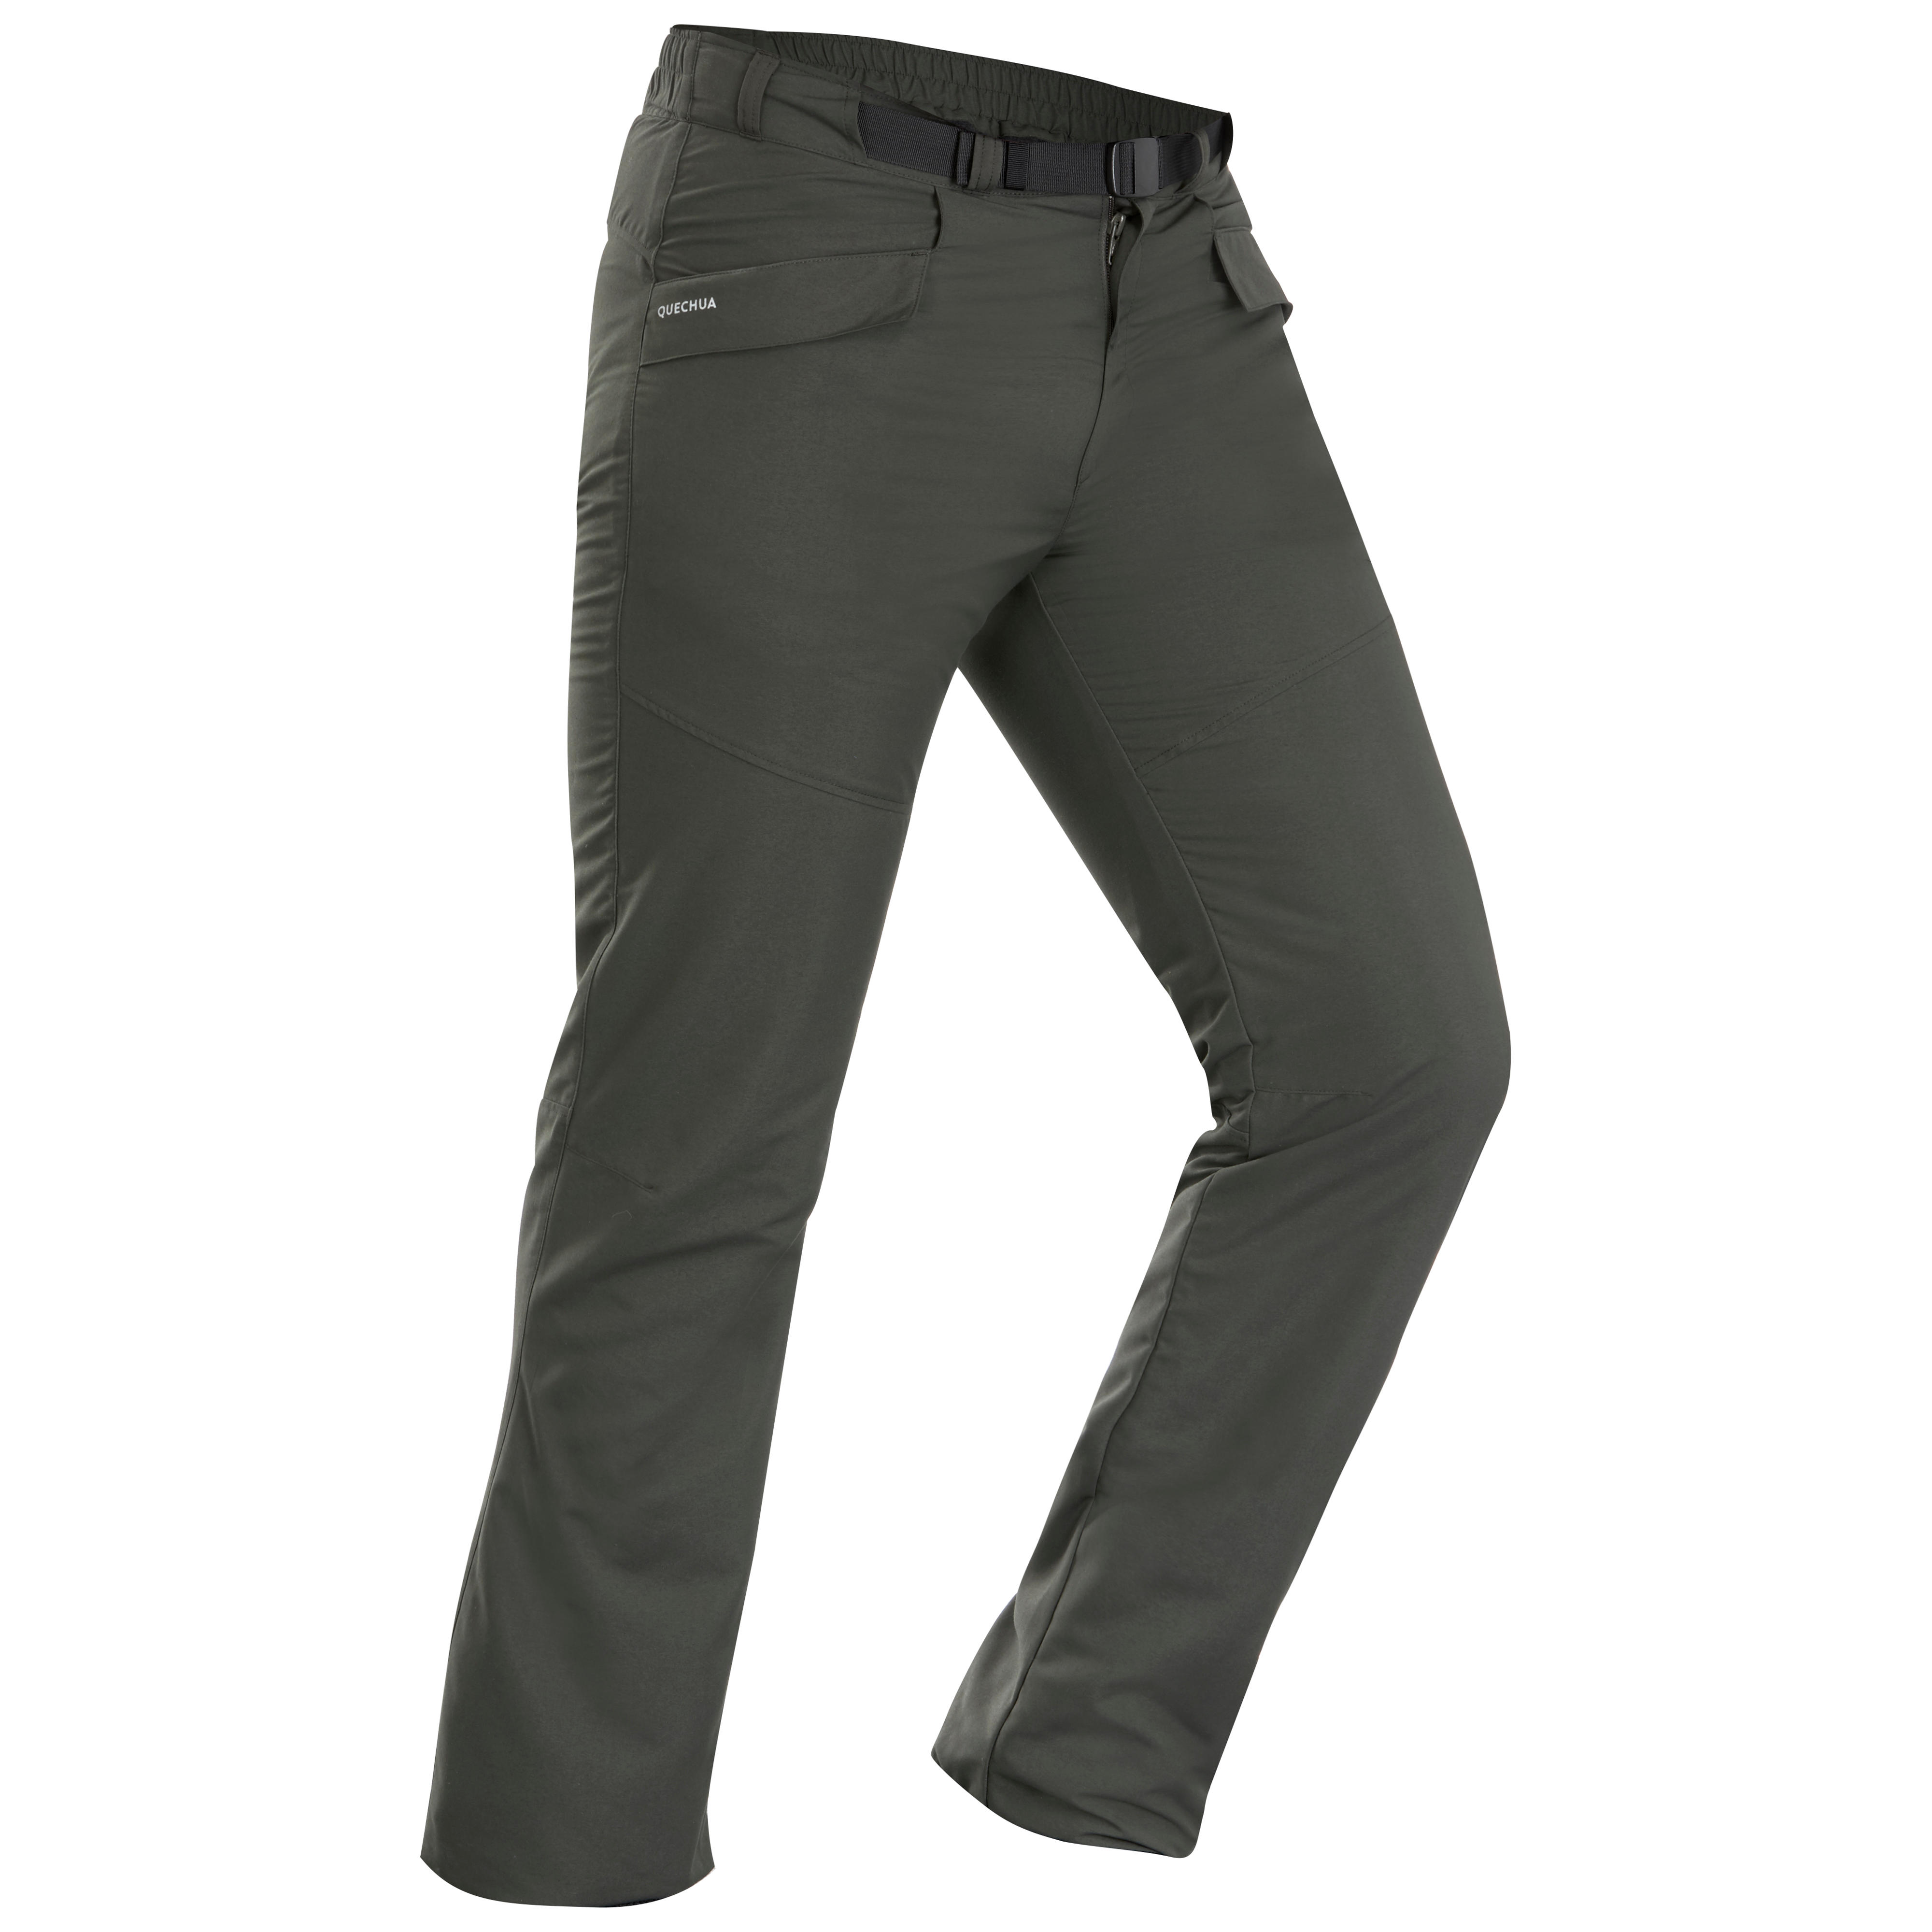 How to choose hiking trousers